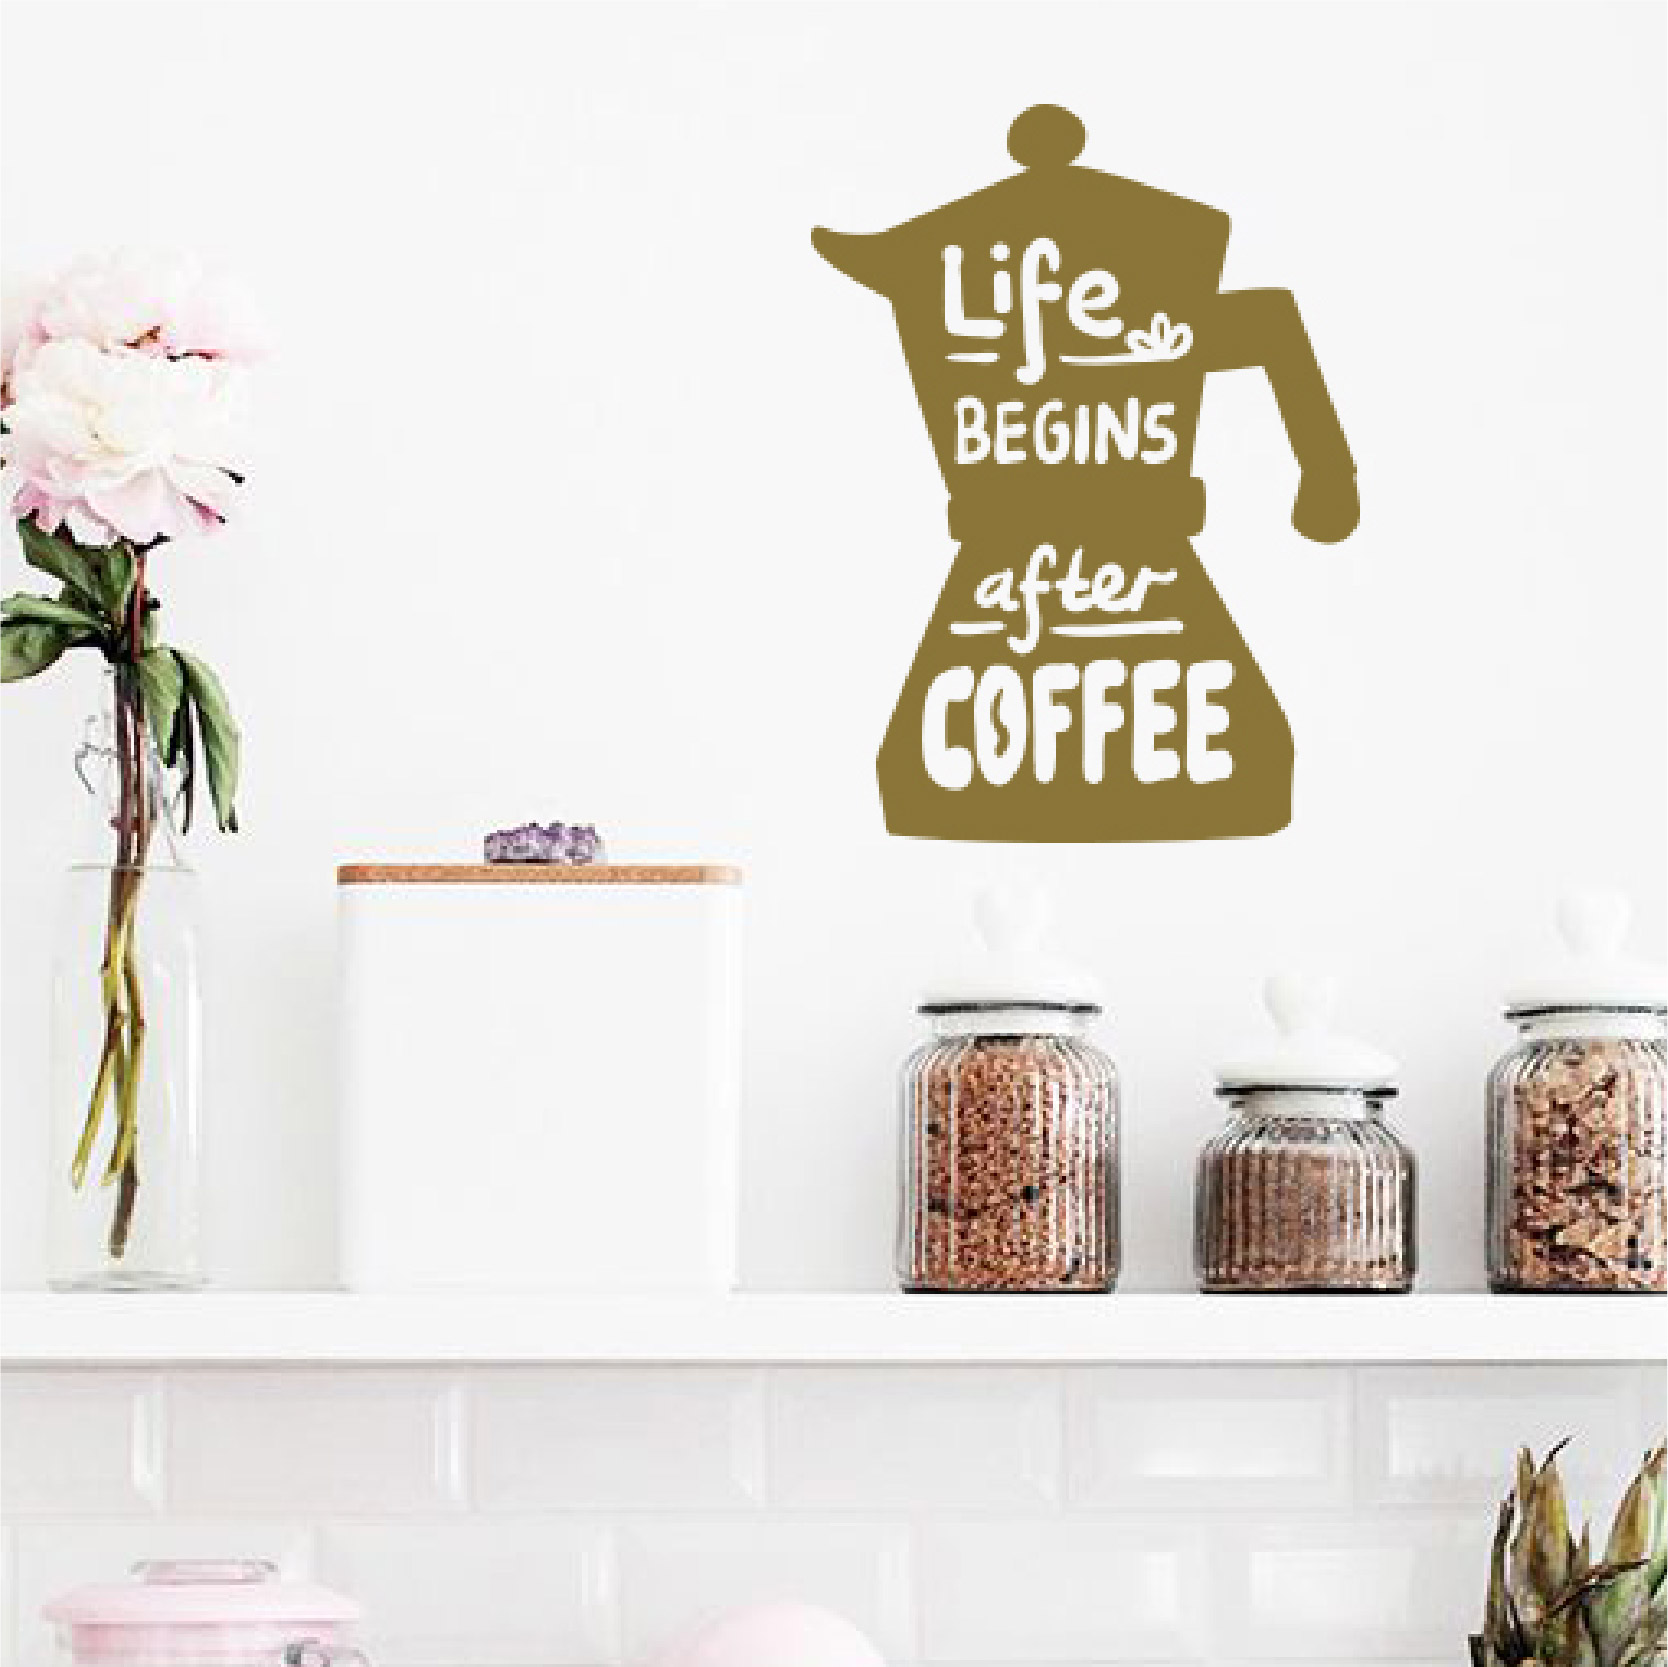 Life begins after coffee - branco